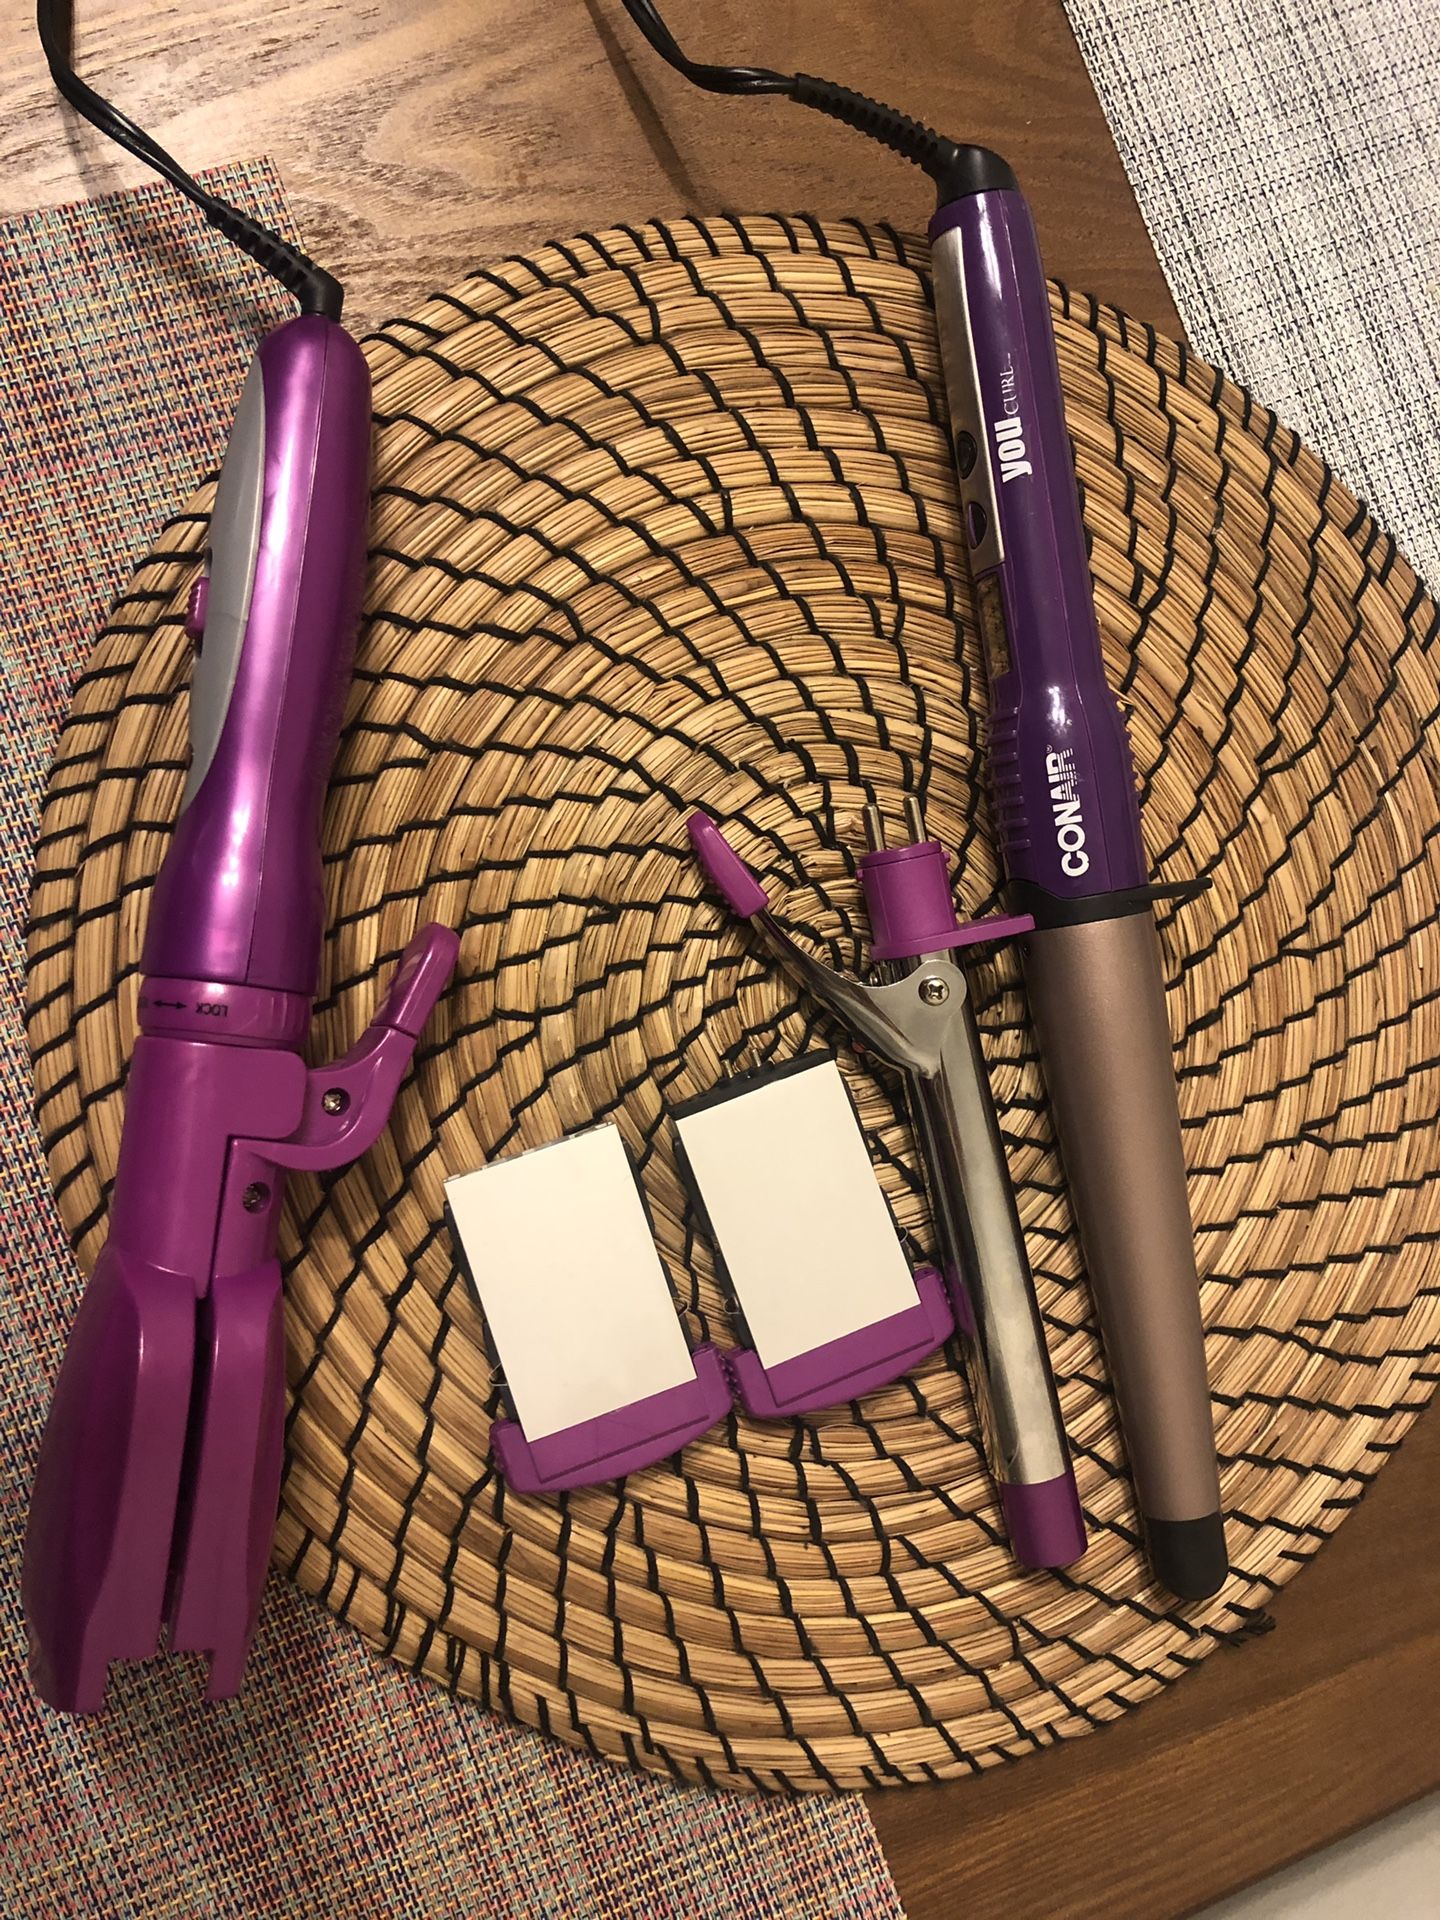 Hair straightening and curler